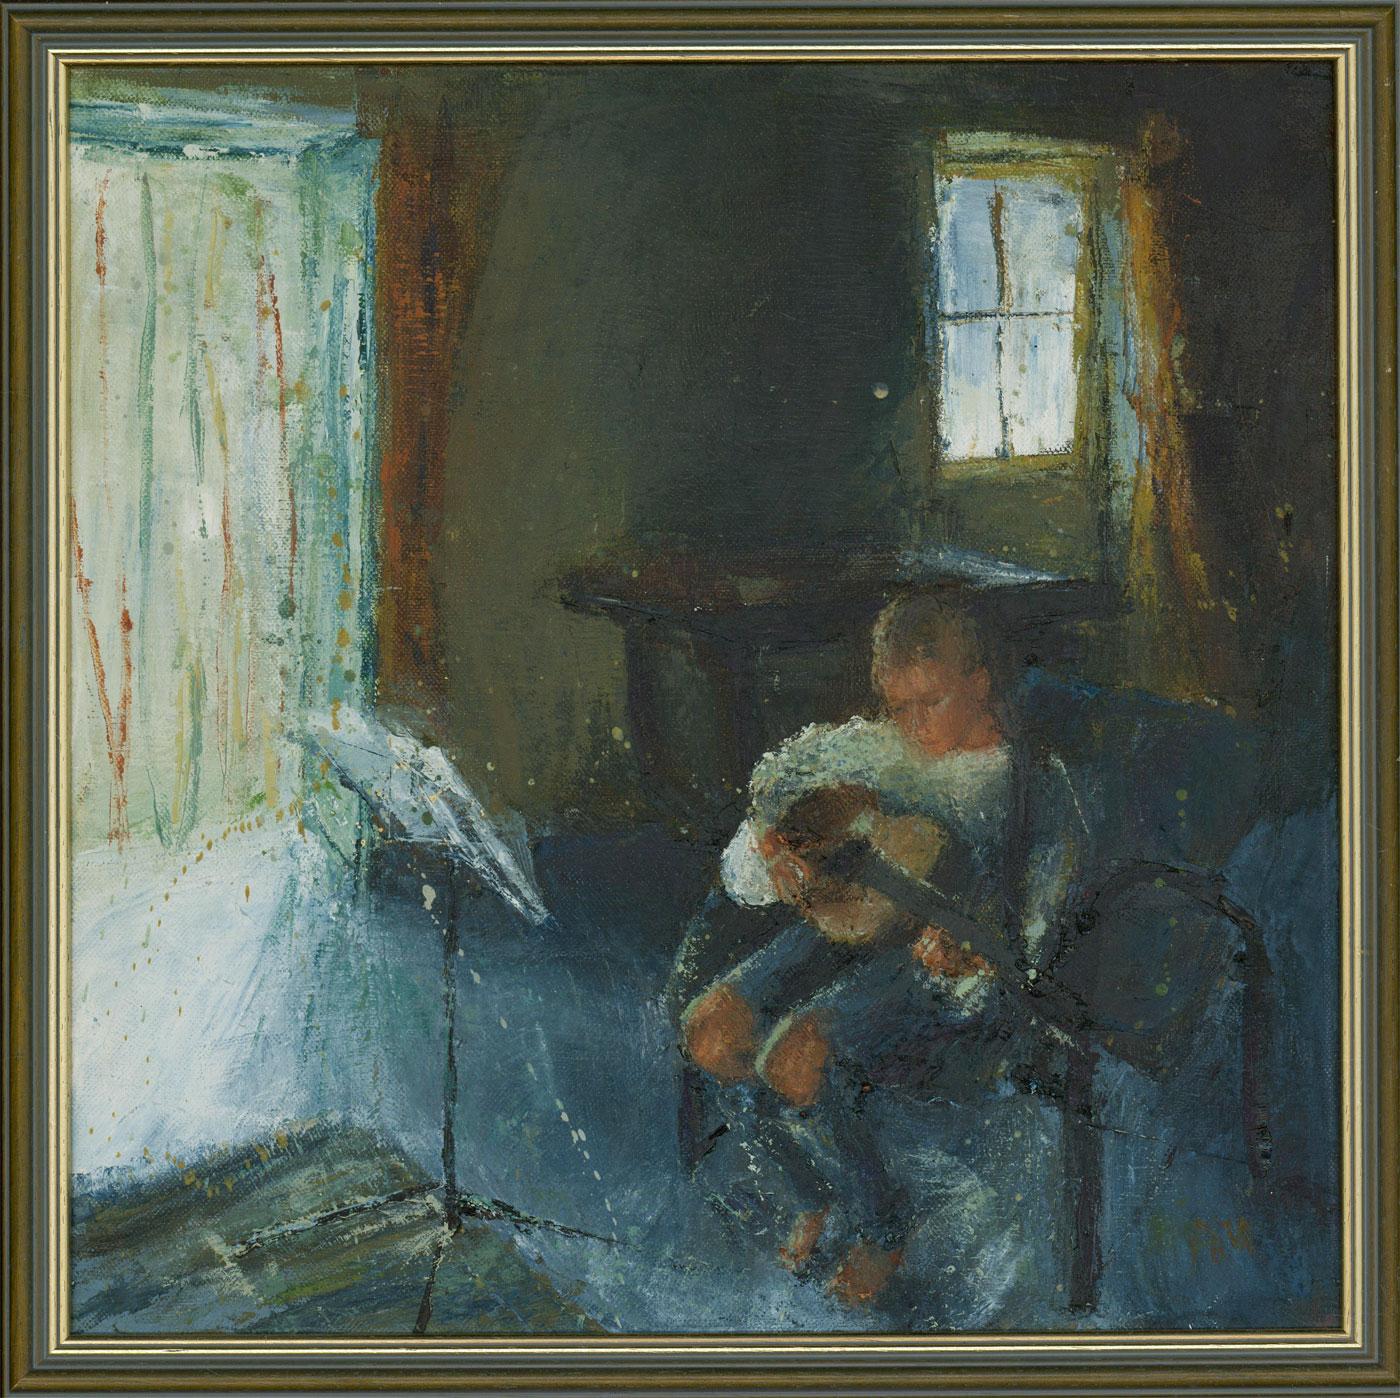 Unknown Interior Painting - A.M. - Framed Contemporary Oil, The Musician